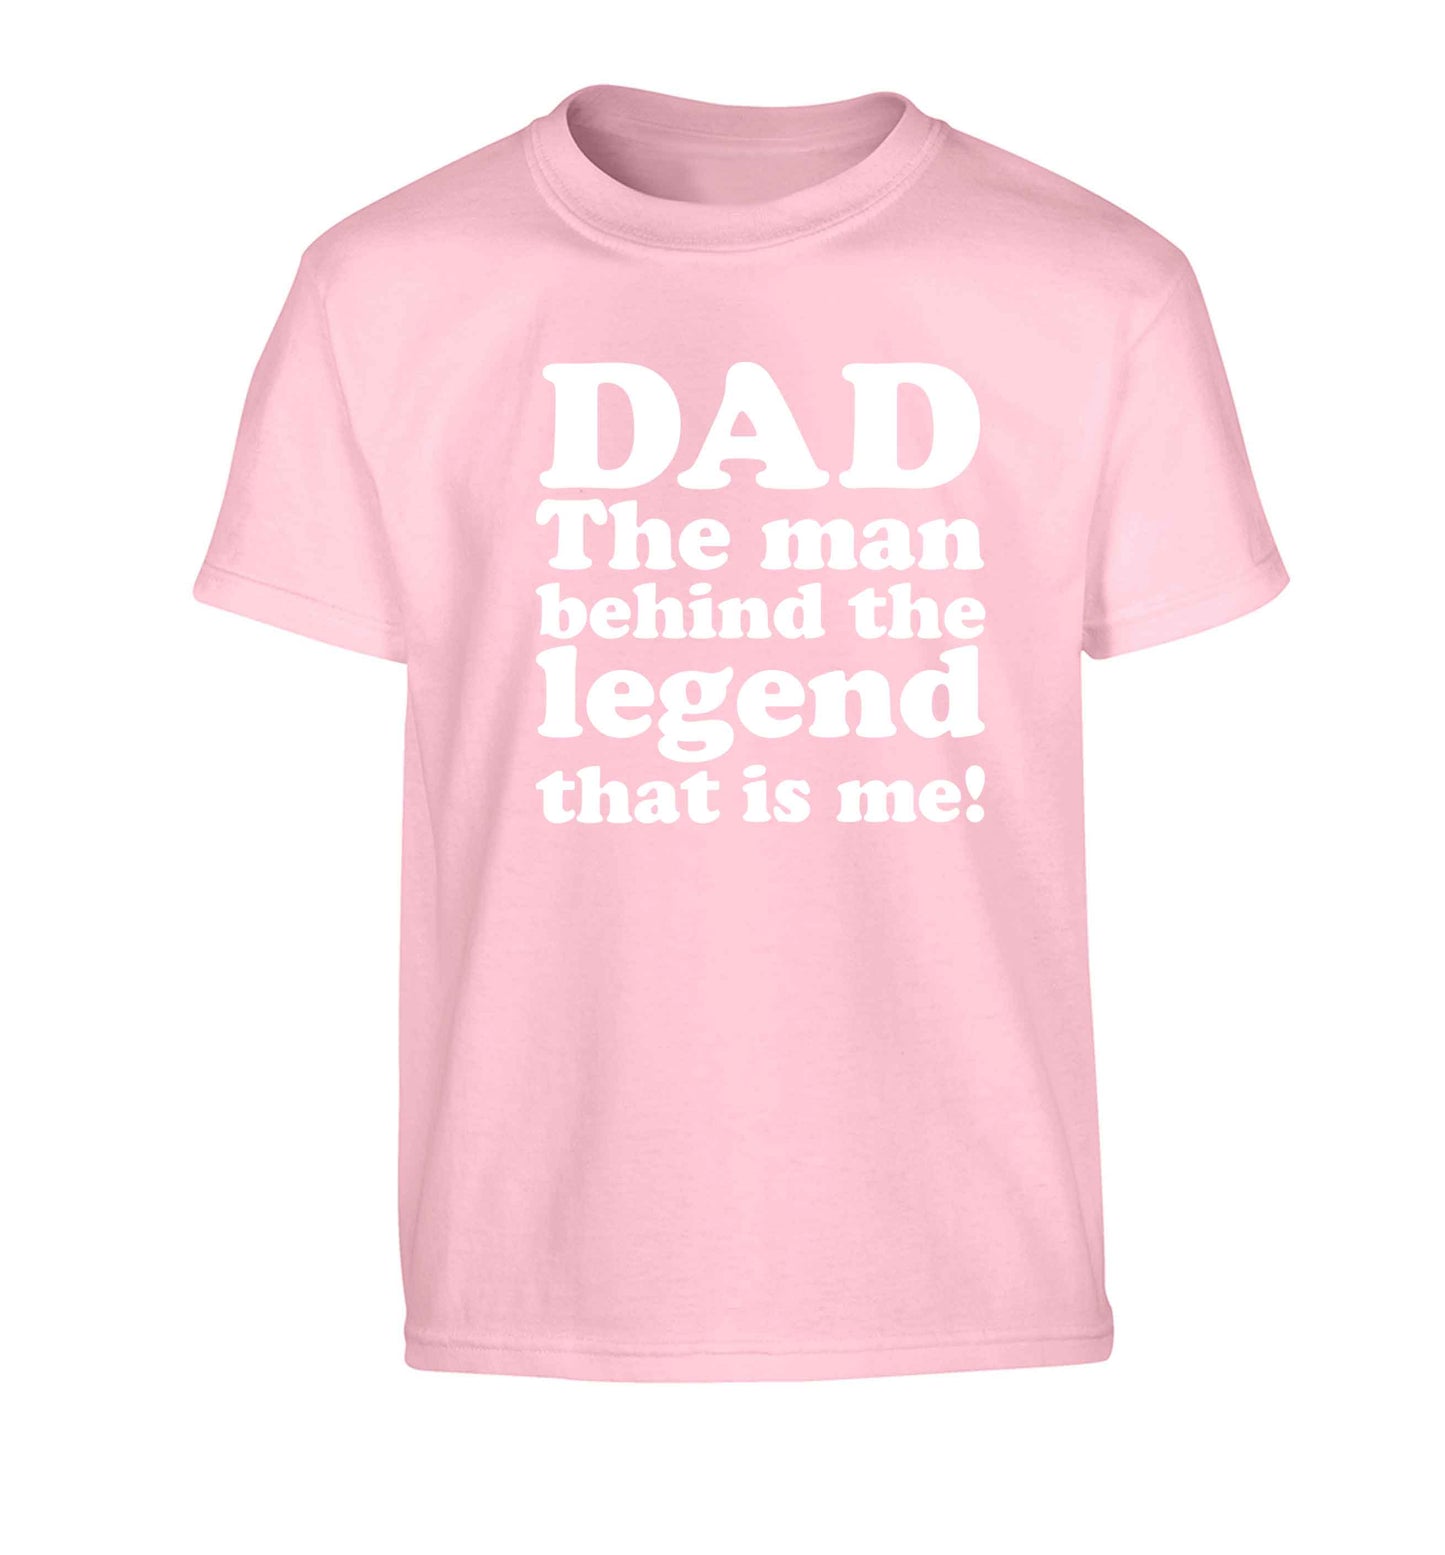 Dad the man behind the legend that is me Children's light pink Tshirt 12-13 Years